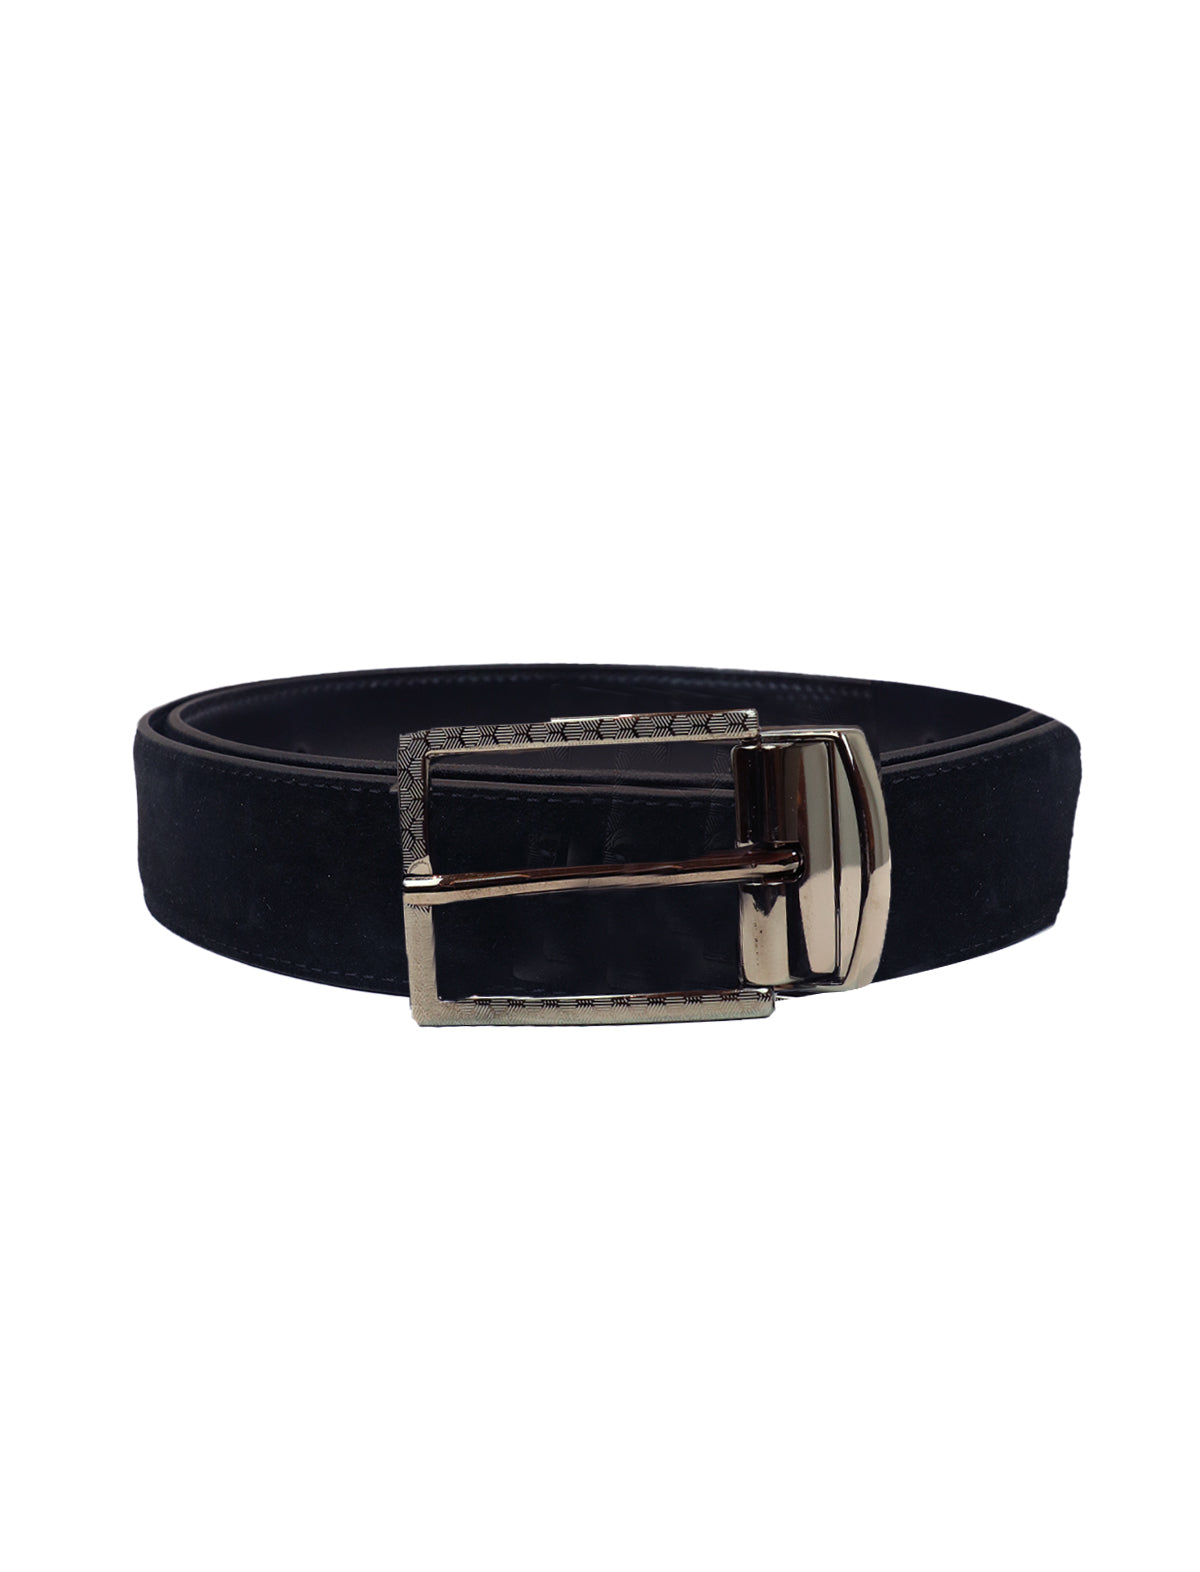 Andrea d'Amico Reversible Suede Leather Belt in Black